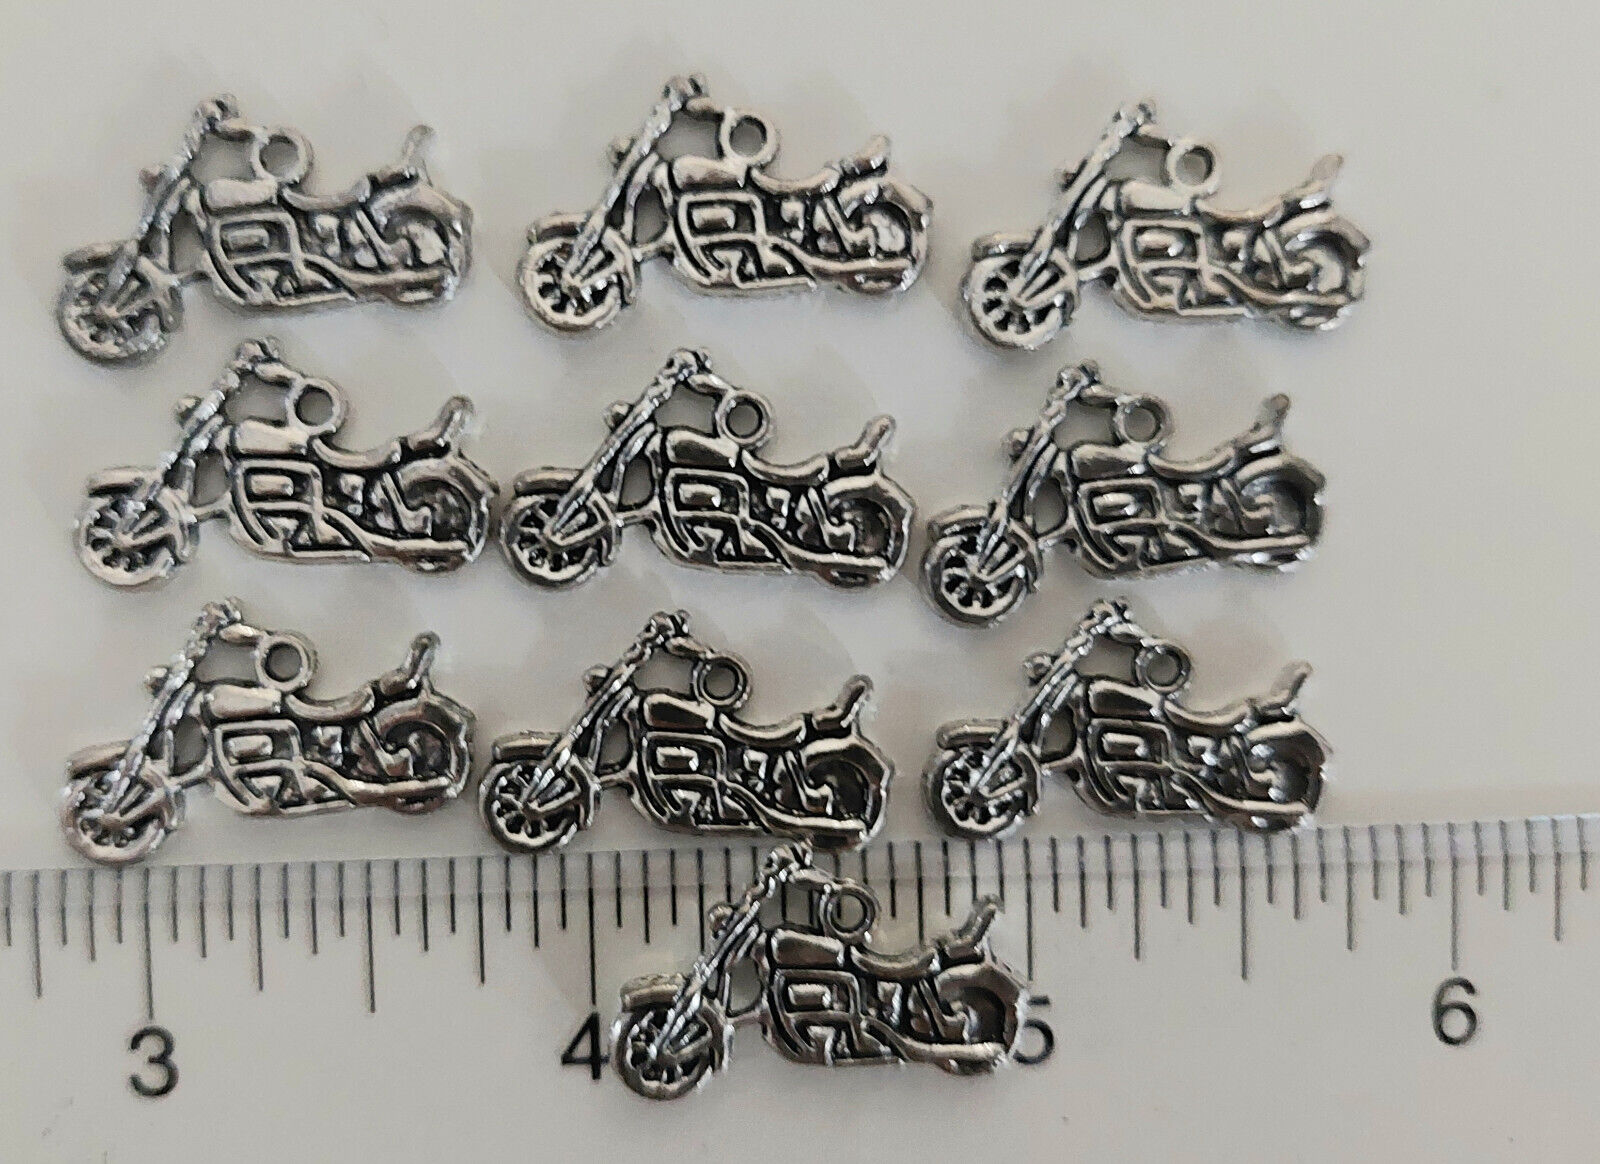 Lot of 10 Antiqued Silver Harley Davidson Motorcycle Charms New